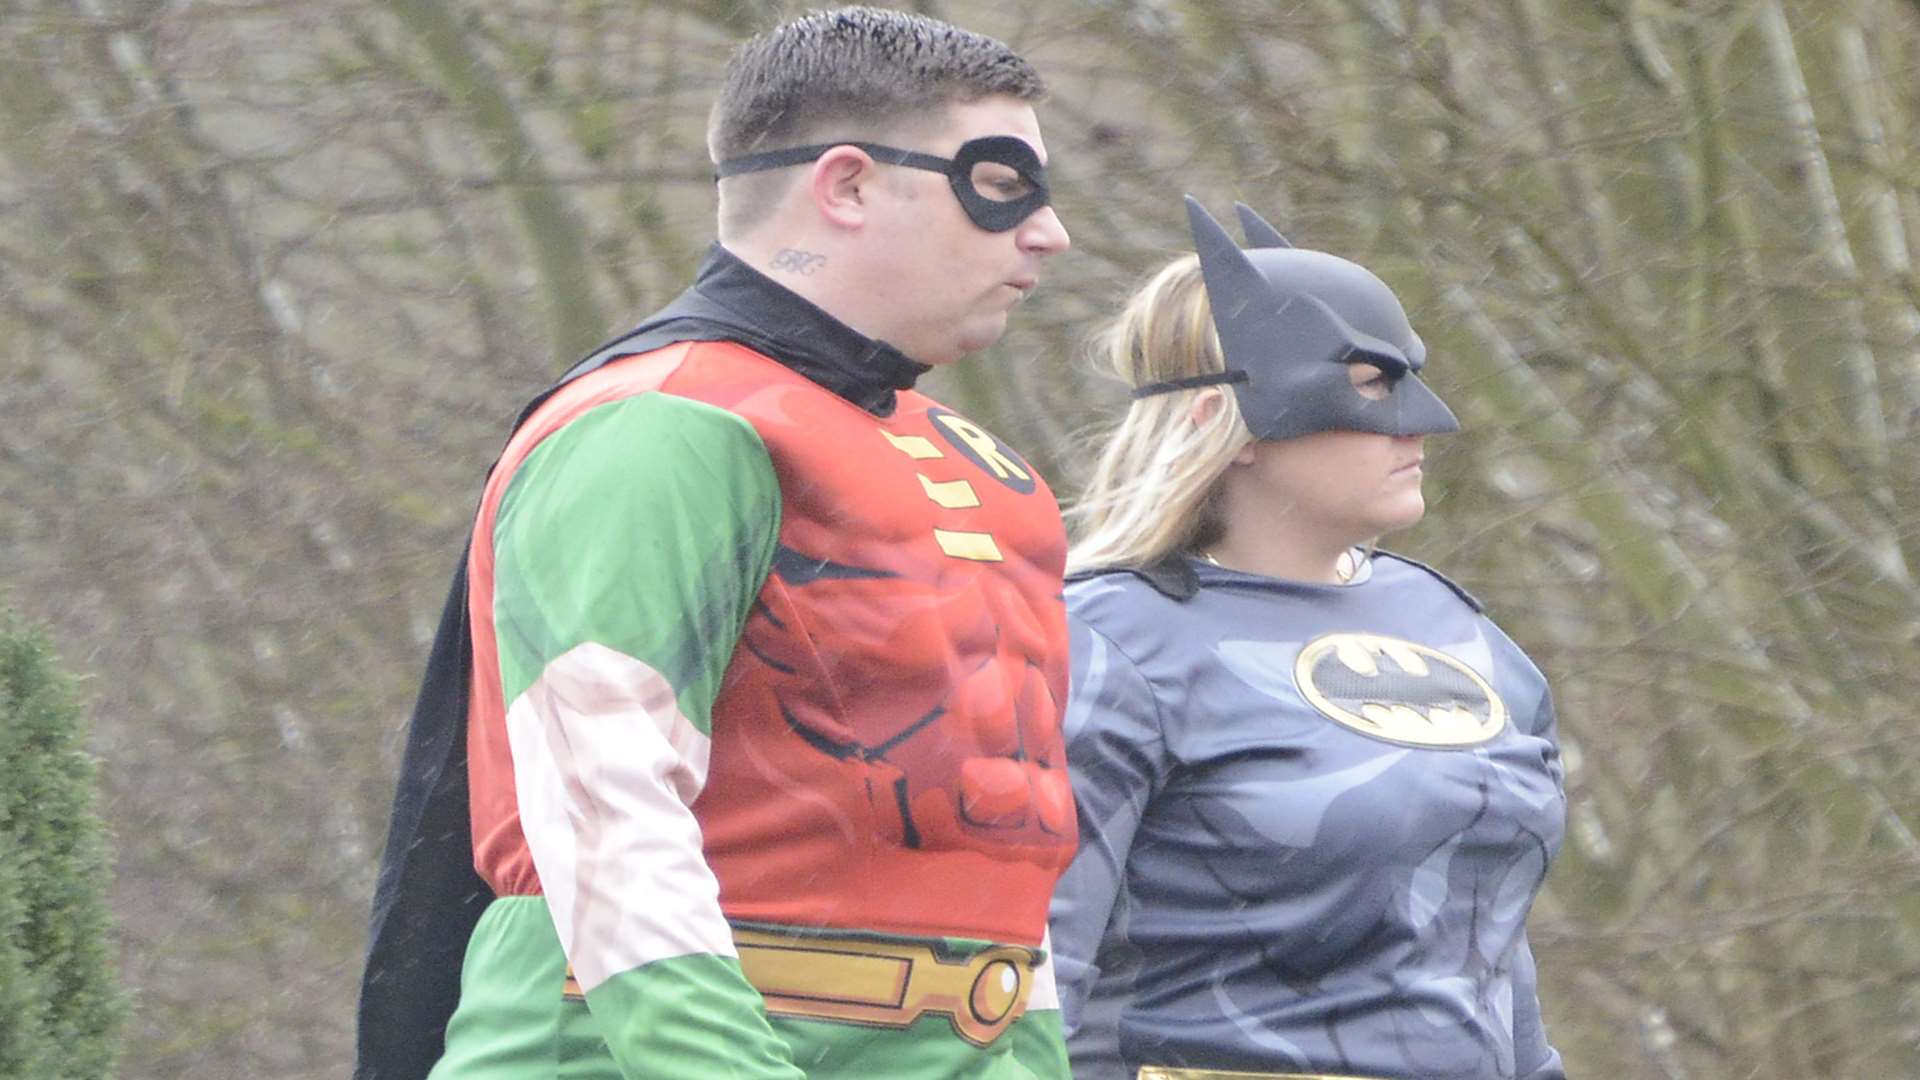 People were asked to dress up as superheroes in memory of Harry